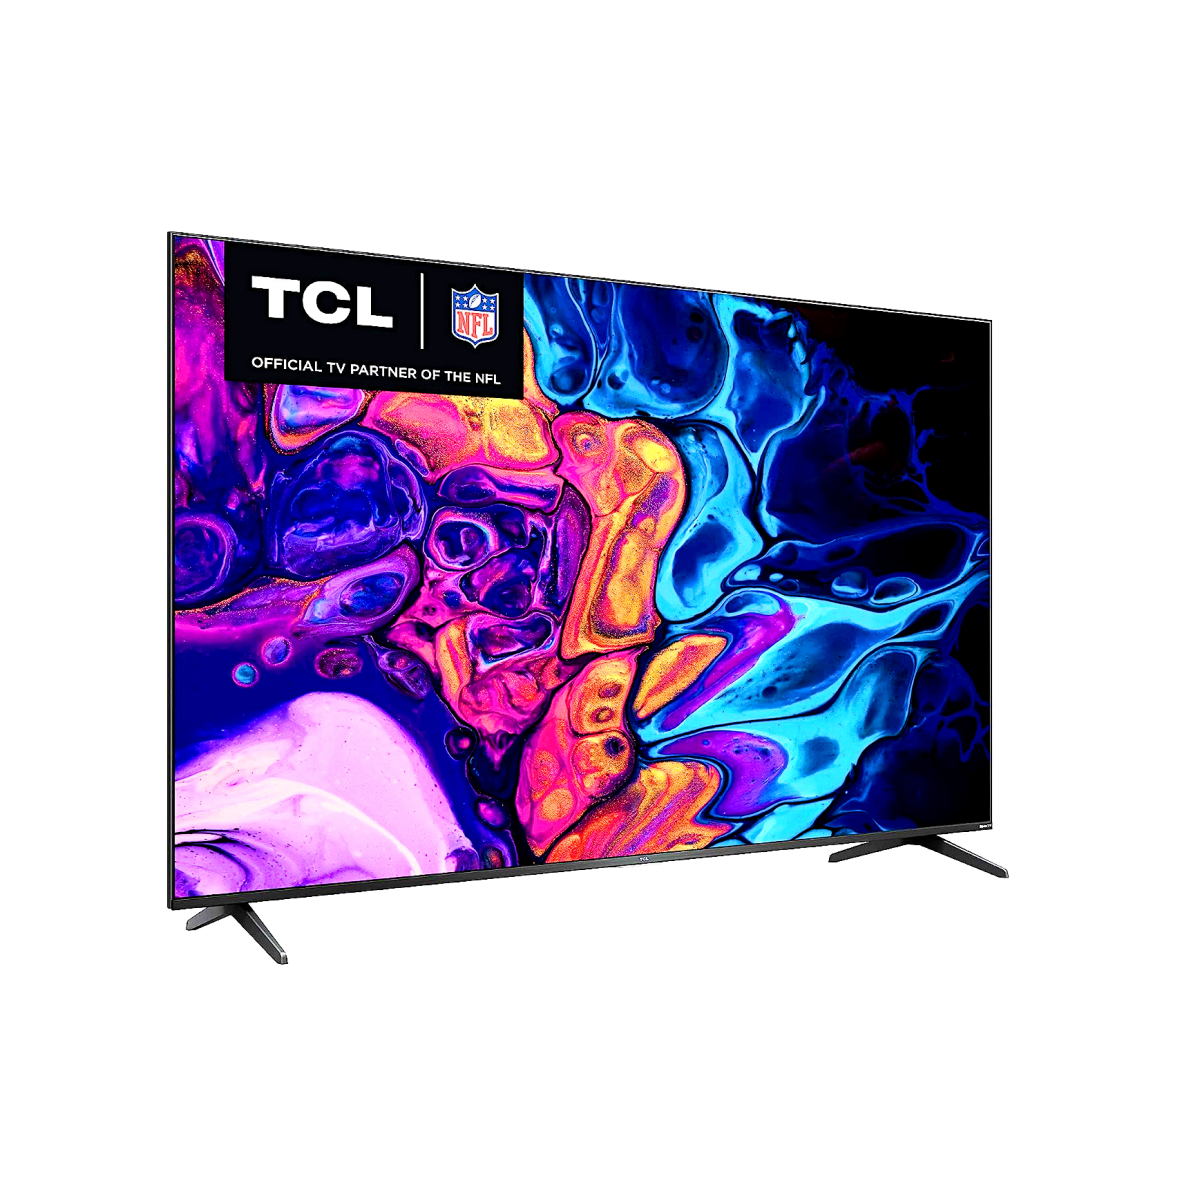 A TCL 5-Series (S555) QLED TV